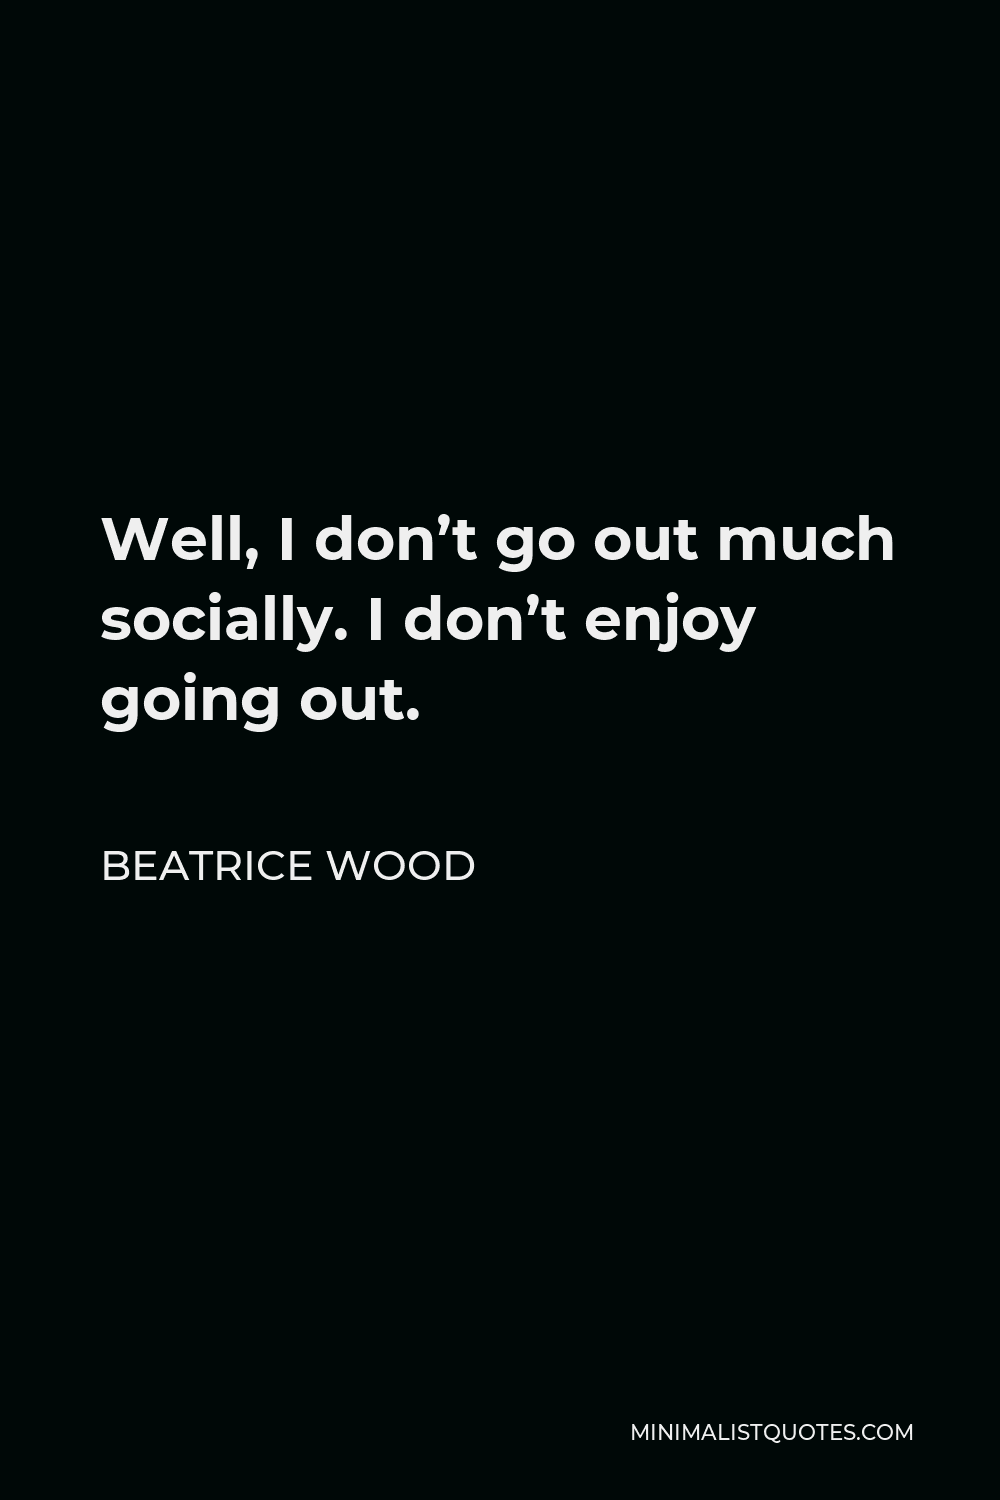 Beatrice Wood Quote - Well, I don’t go out much socially. I don’t enjoy going out.